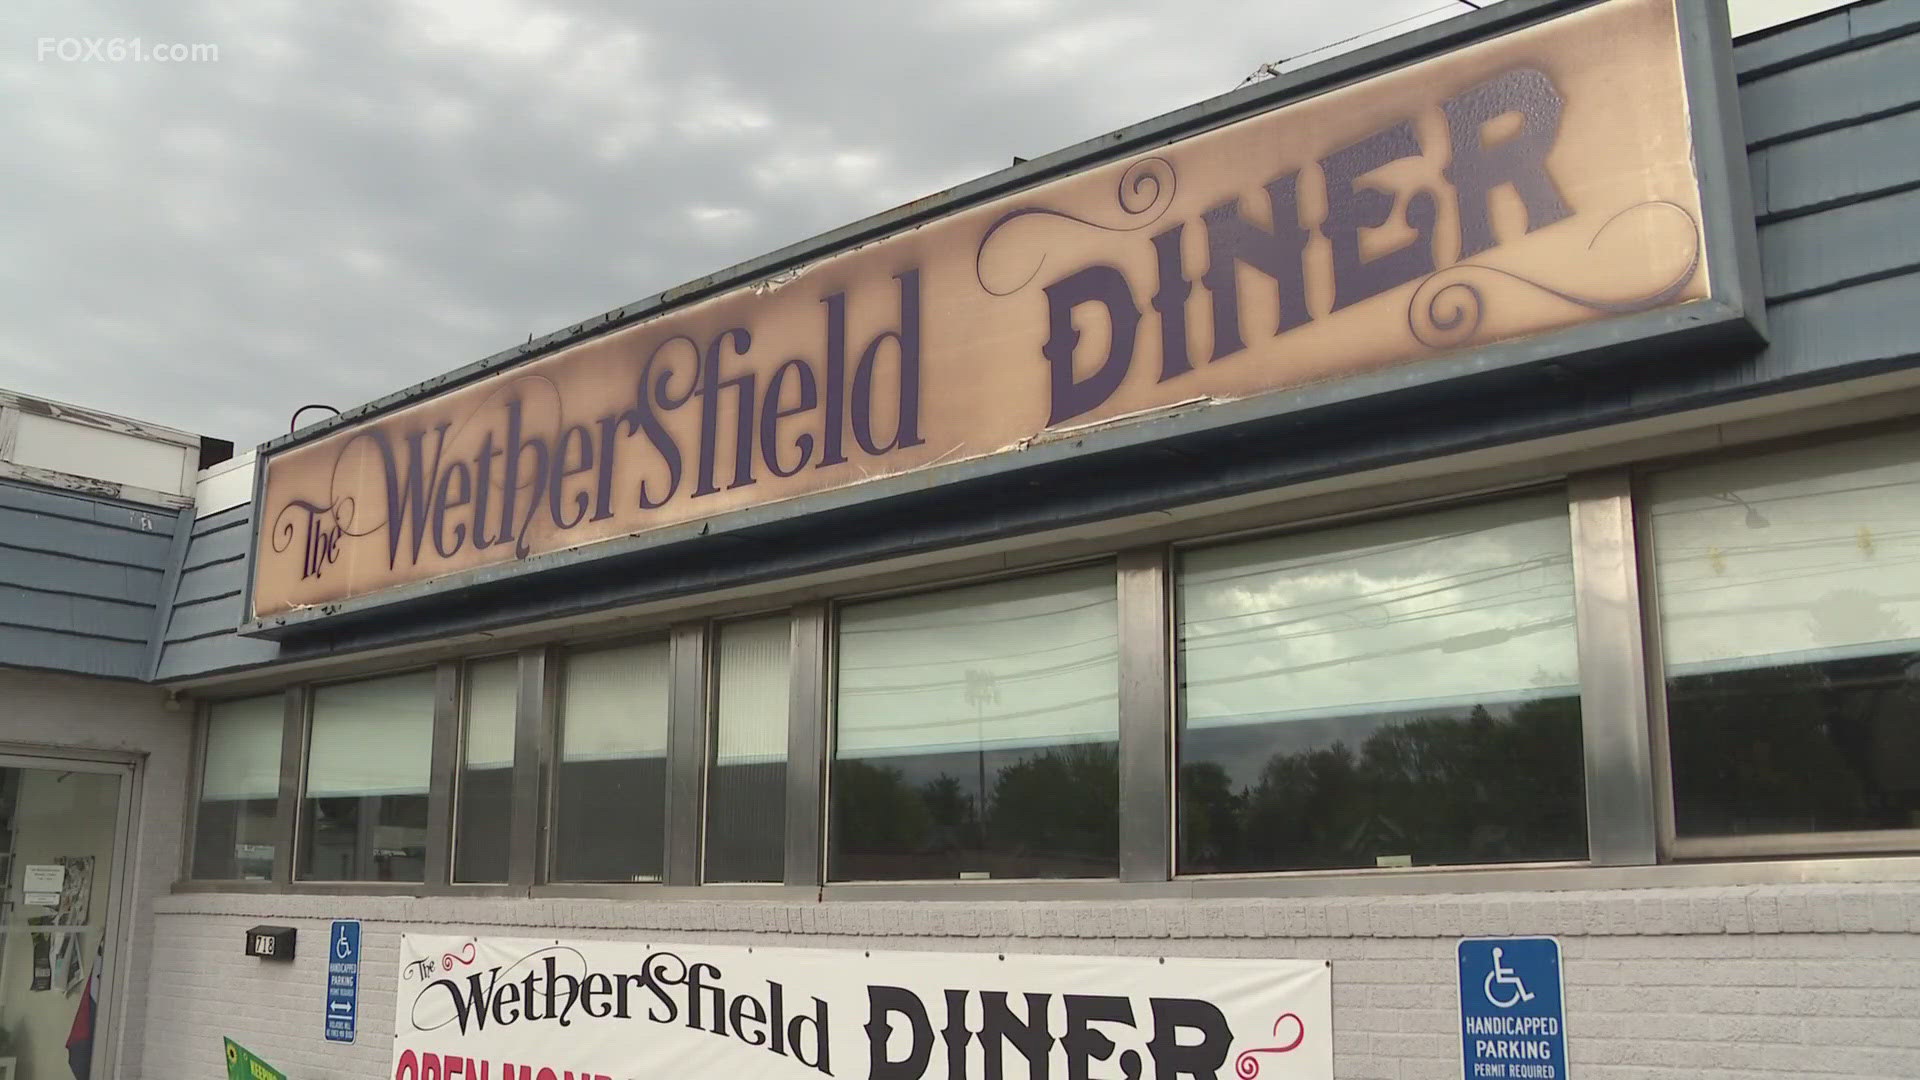 A popular local diner will likely be shutting its doors, and it's not even their decision. The owner feels blindsided and betrayed by the landlord and the town.